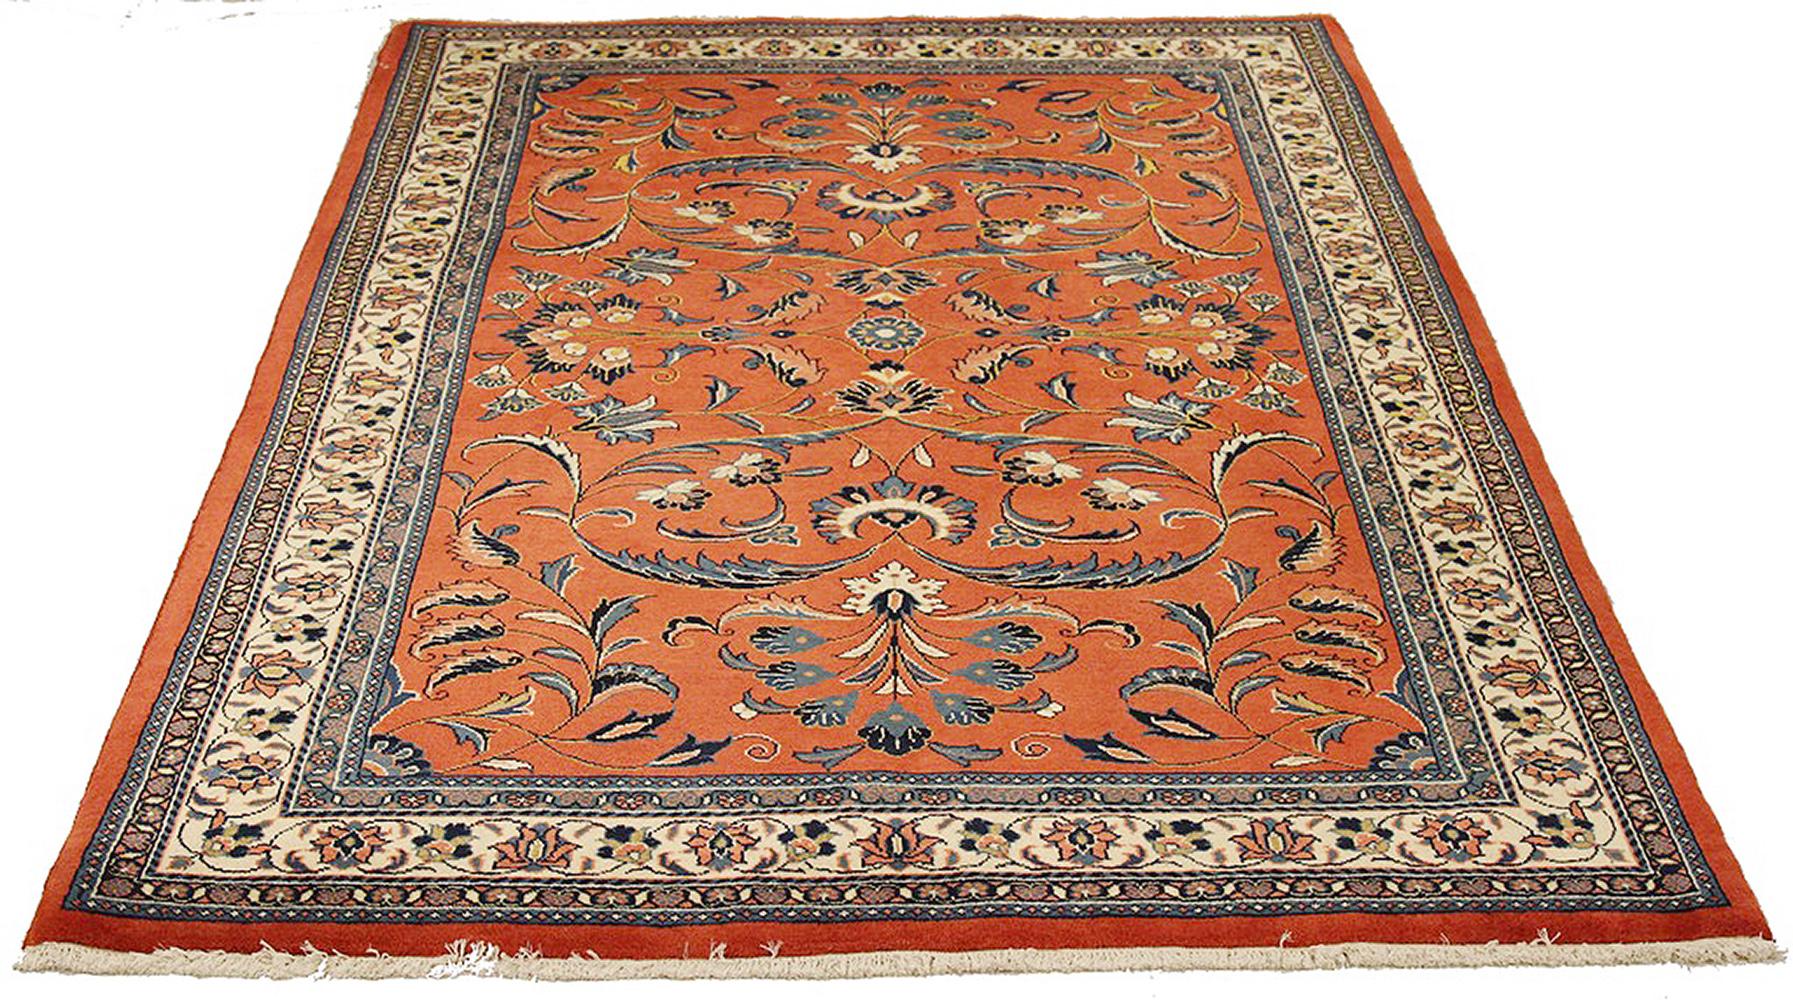 Antique Persian rug handwoven from the finest sheep’s wool and colored with all-natural vegetable dyes that are safe for humans and pets. It’s a traditional Sarouk design featuring flower details using a lovely mix of blue and ivory. It has an